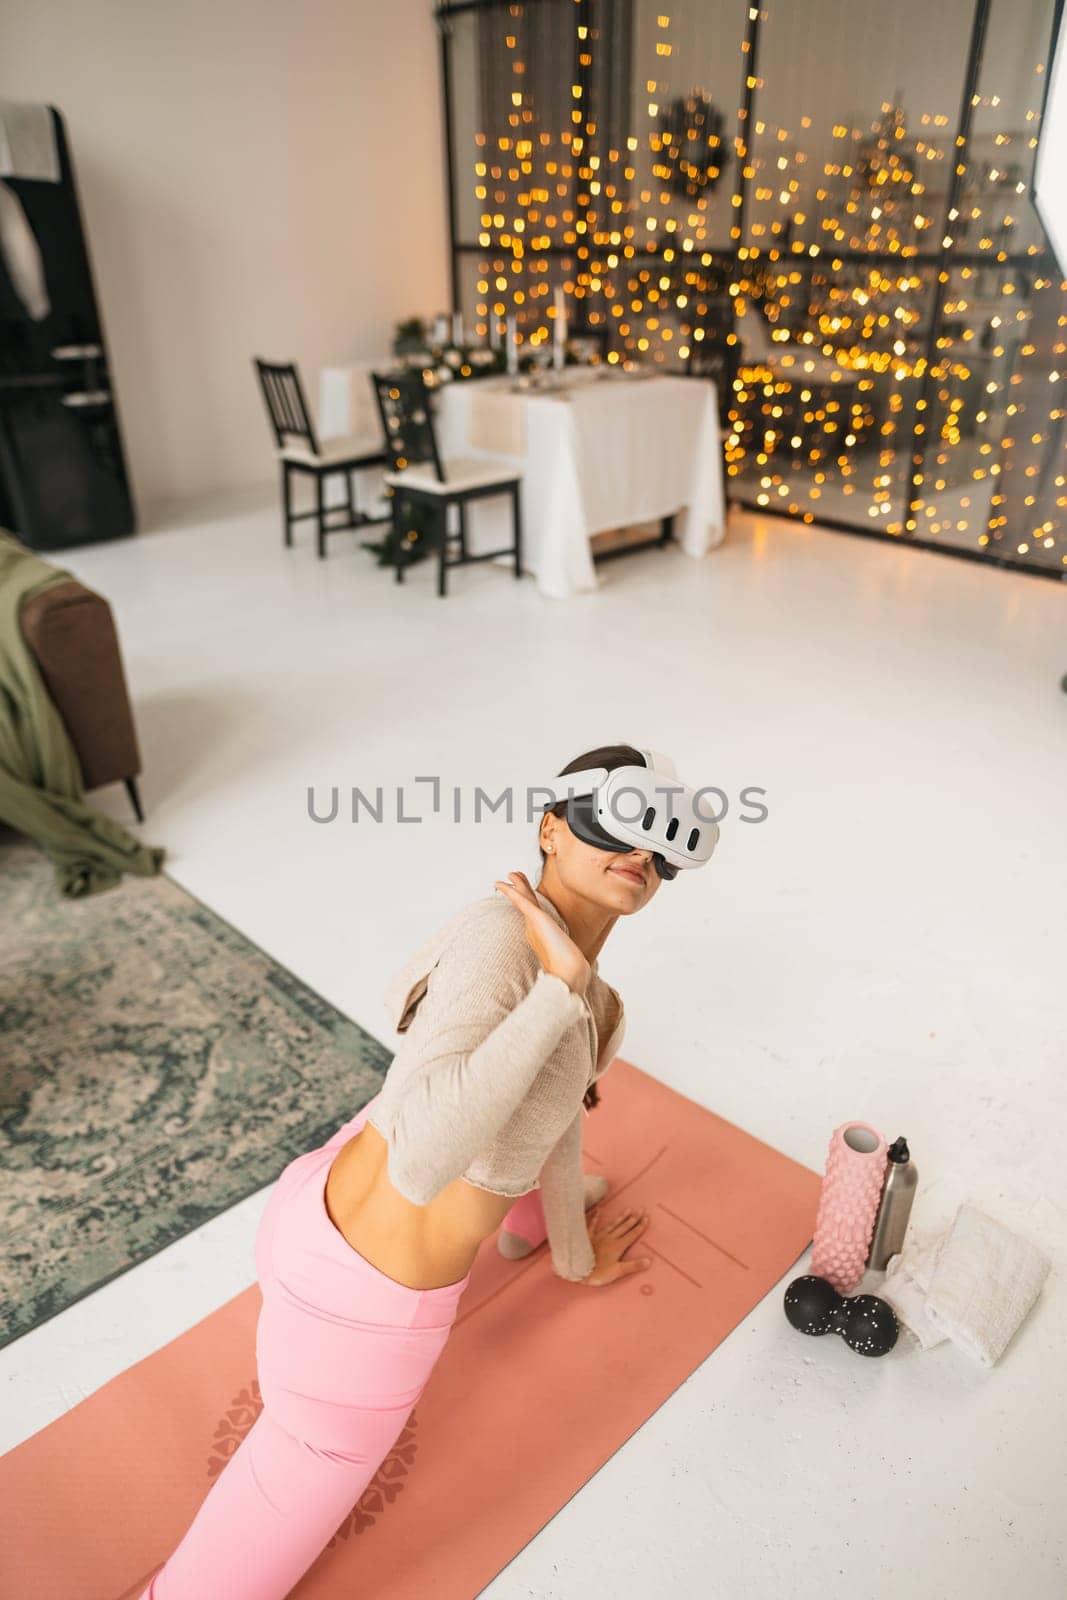 Stretching exercises for the arms during at-home workouts with a virtual reality headset amidst the Christmas celebrations. by teksomolika